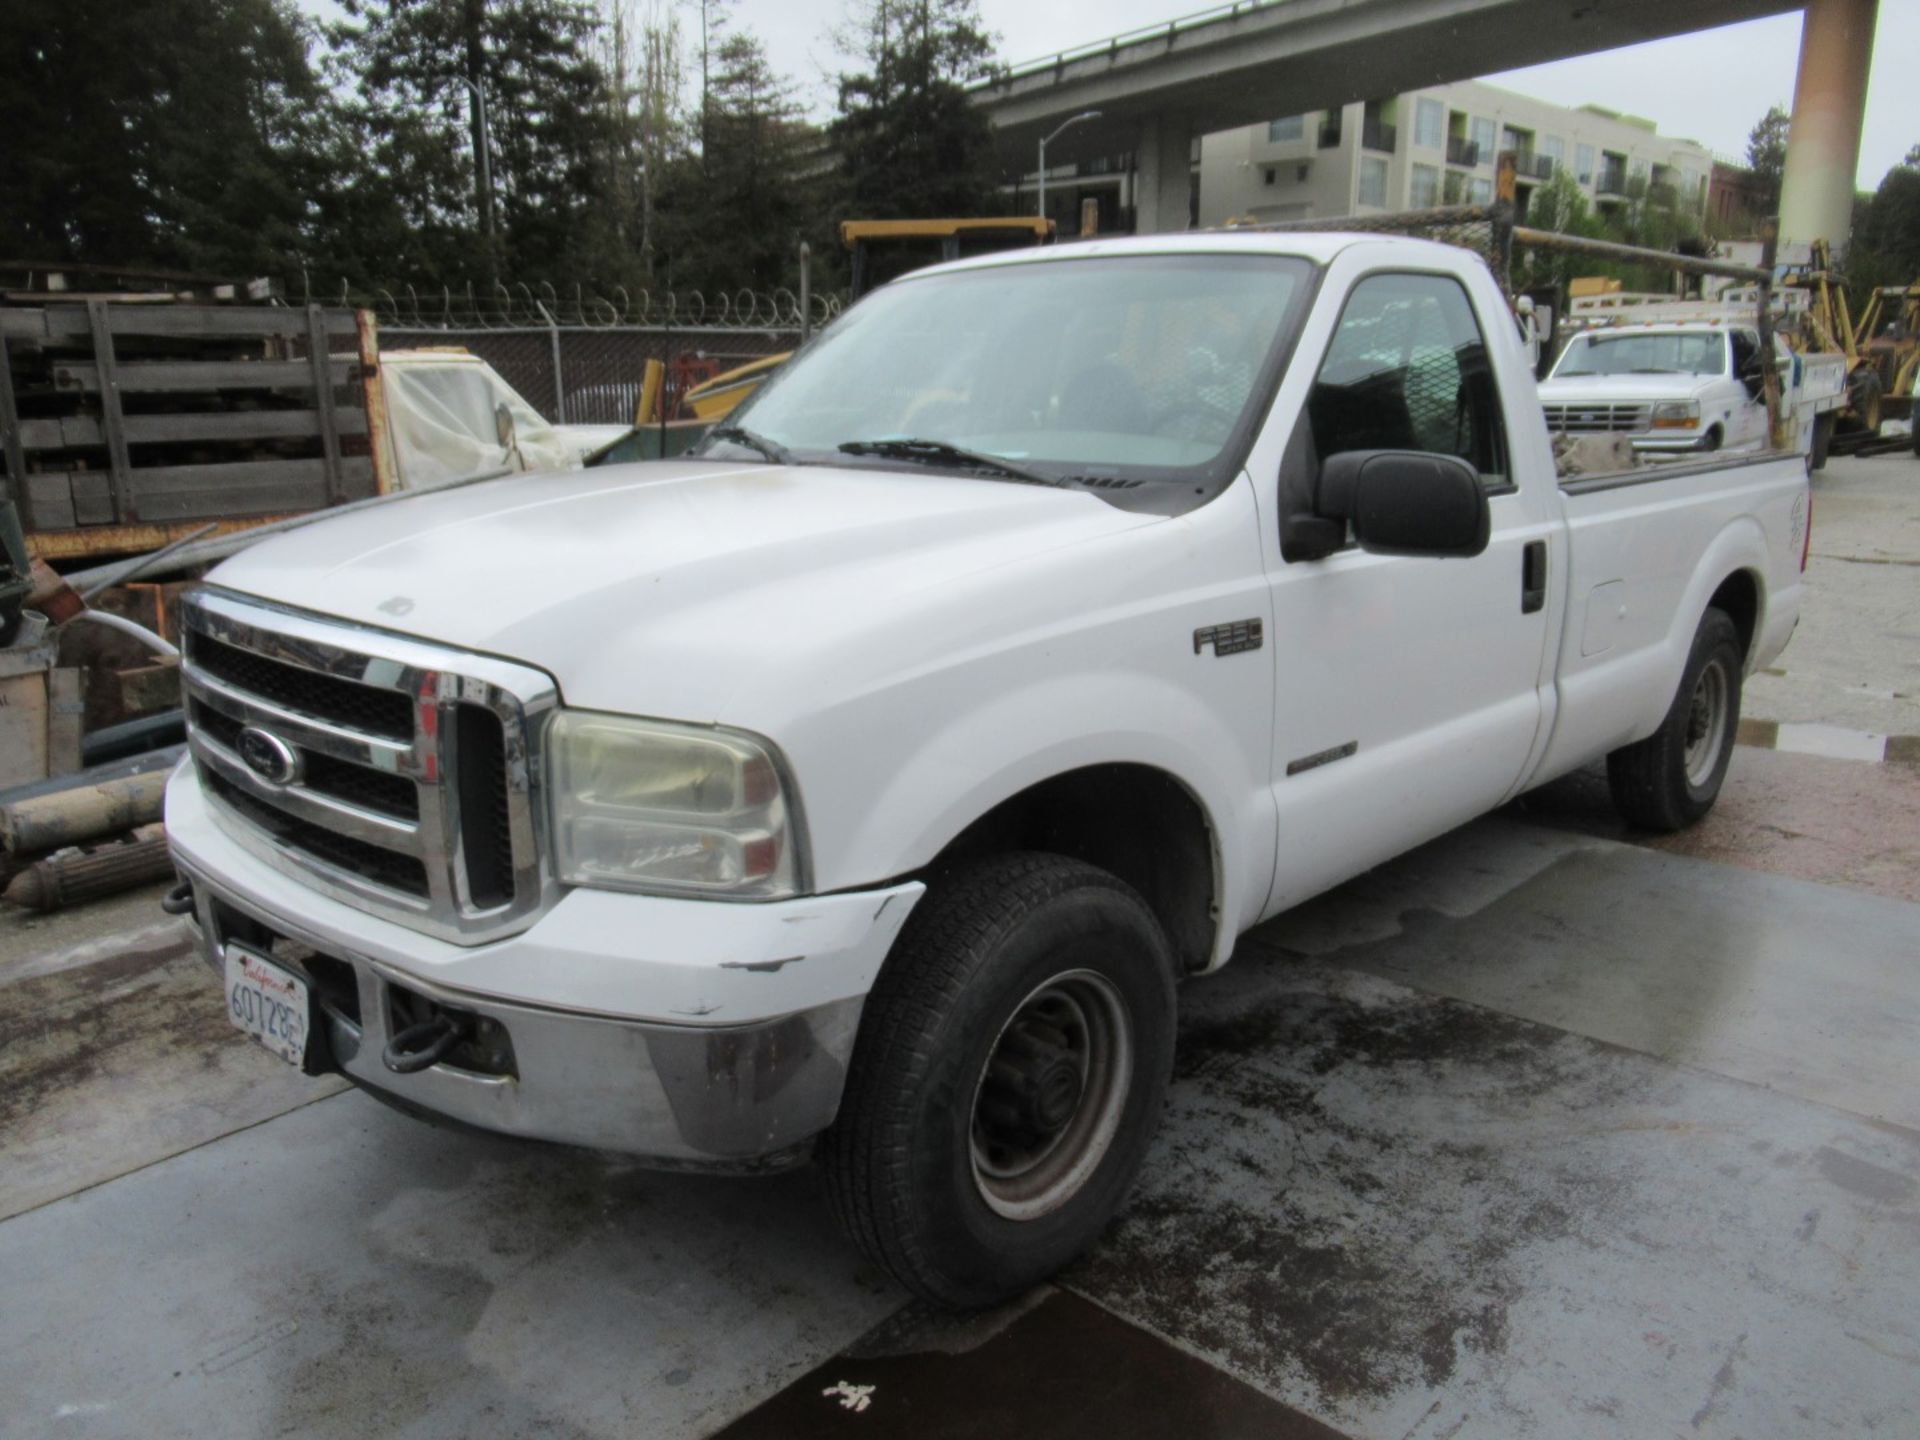 4x4 Pickup Truck - Image 6 of 6